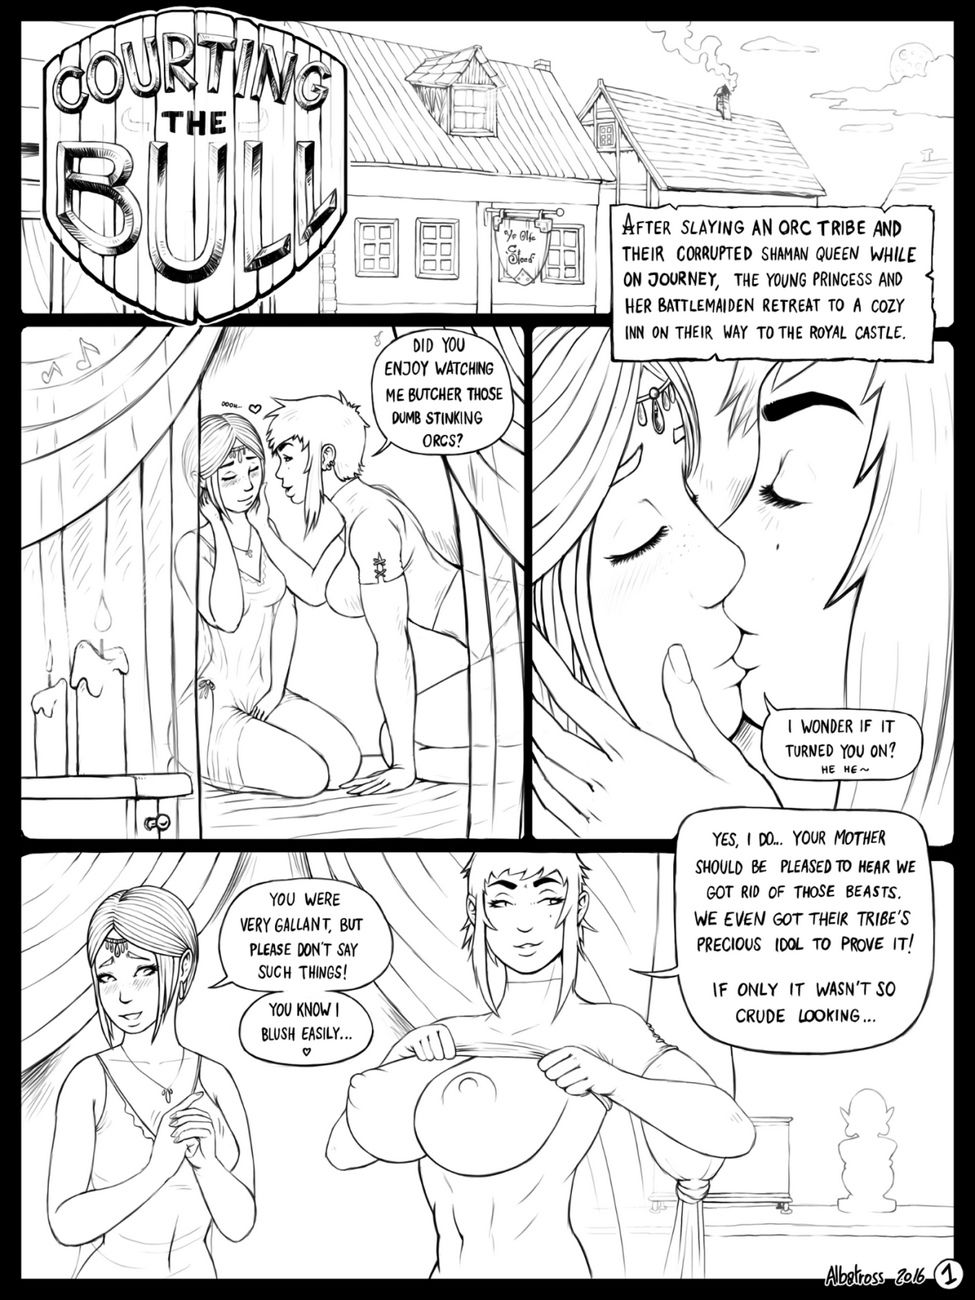 Courting The Bull page 2